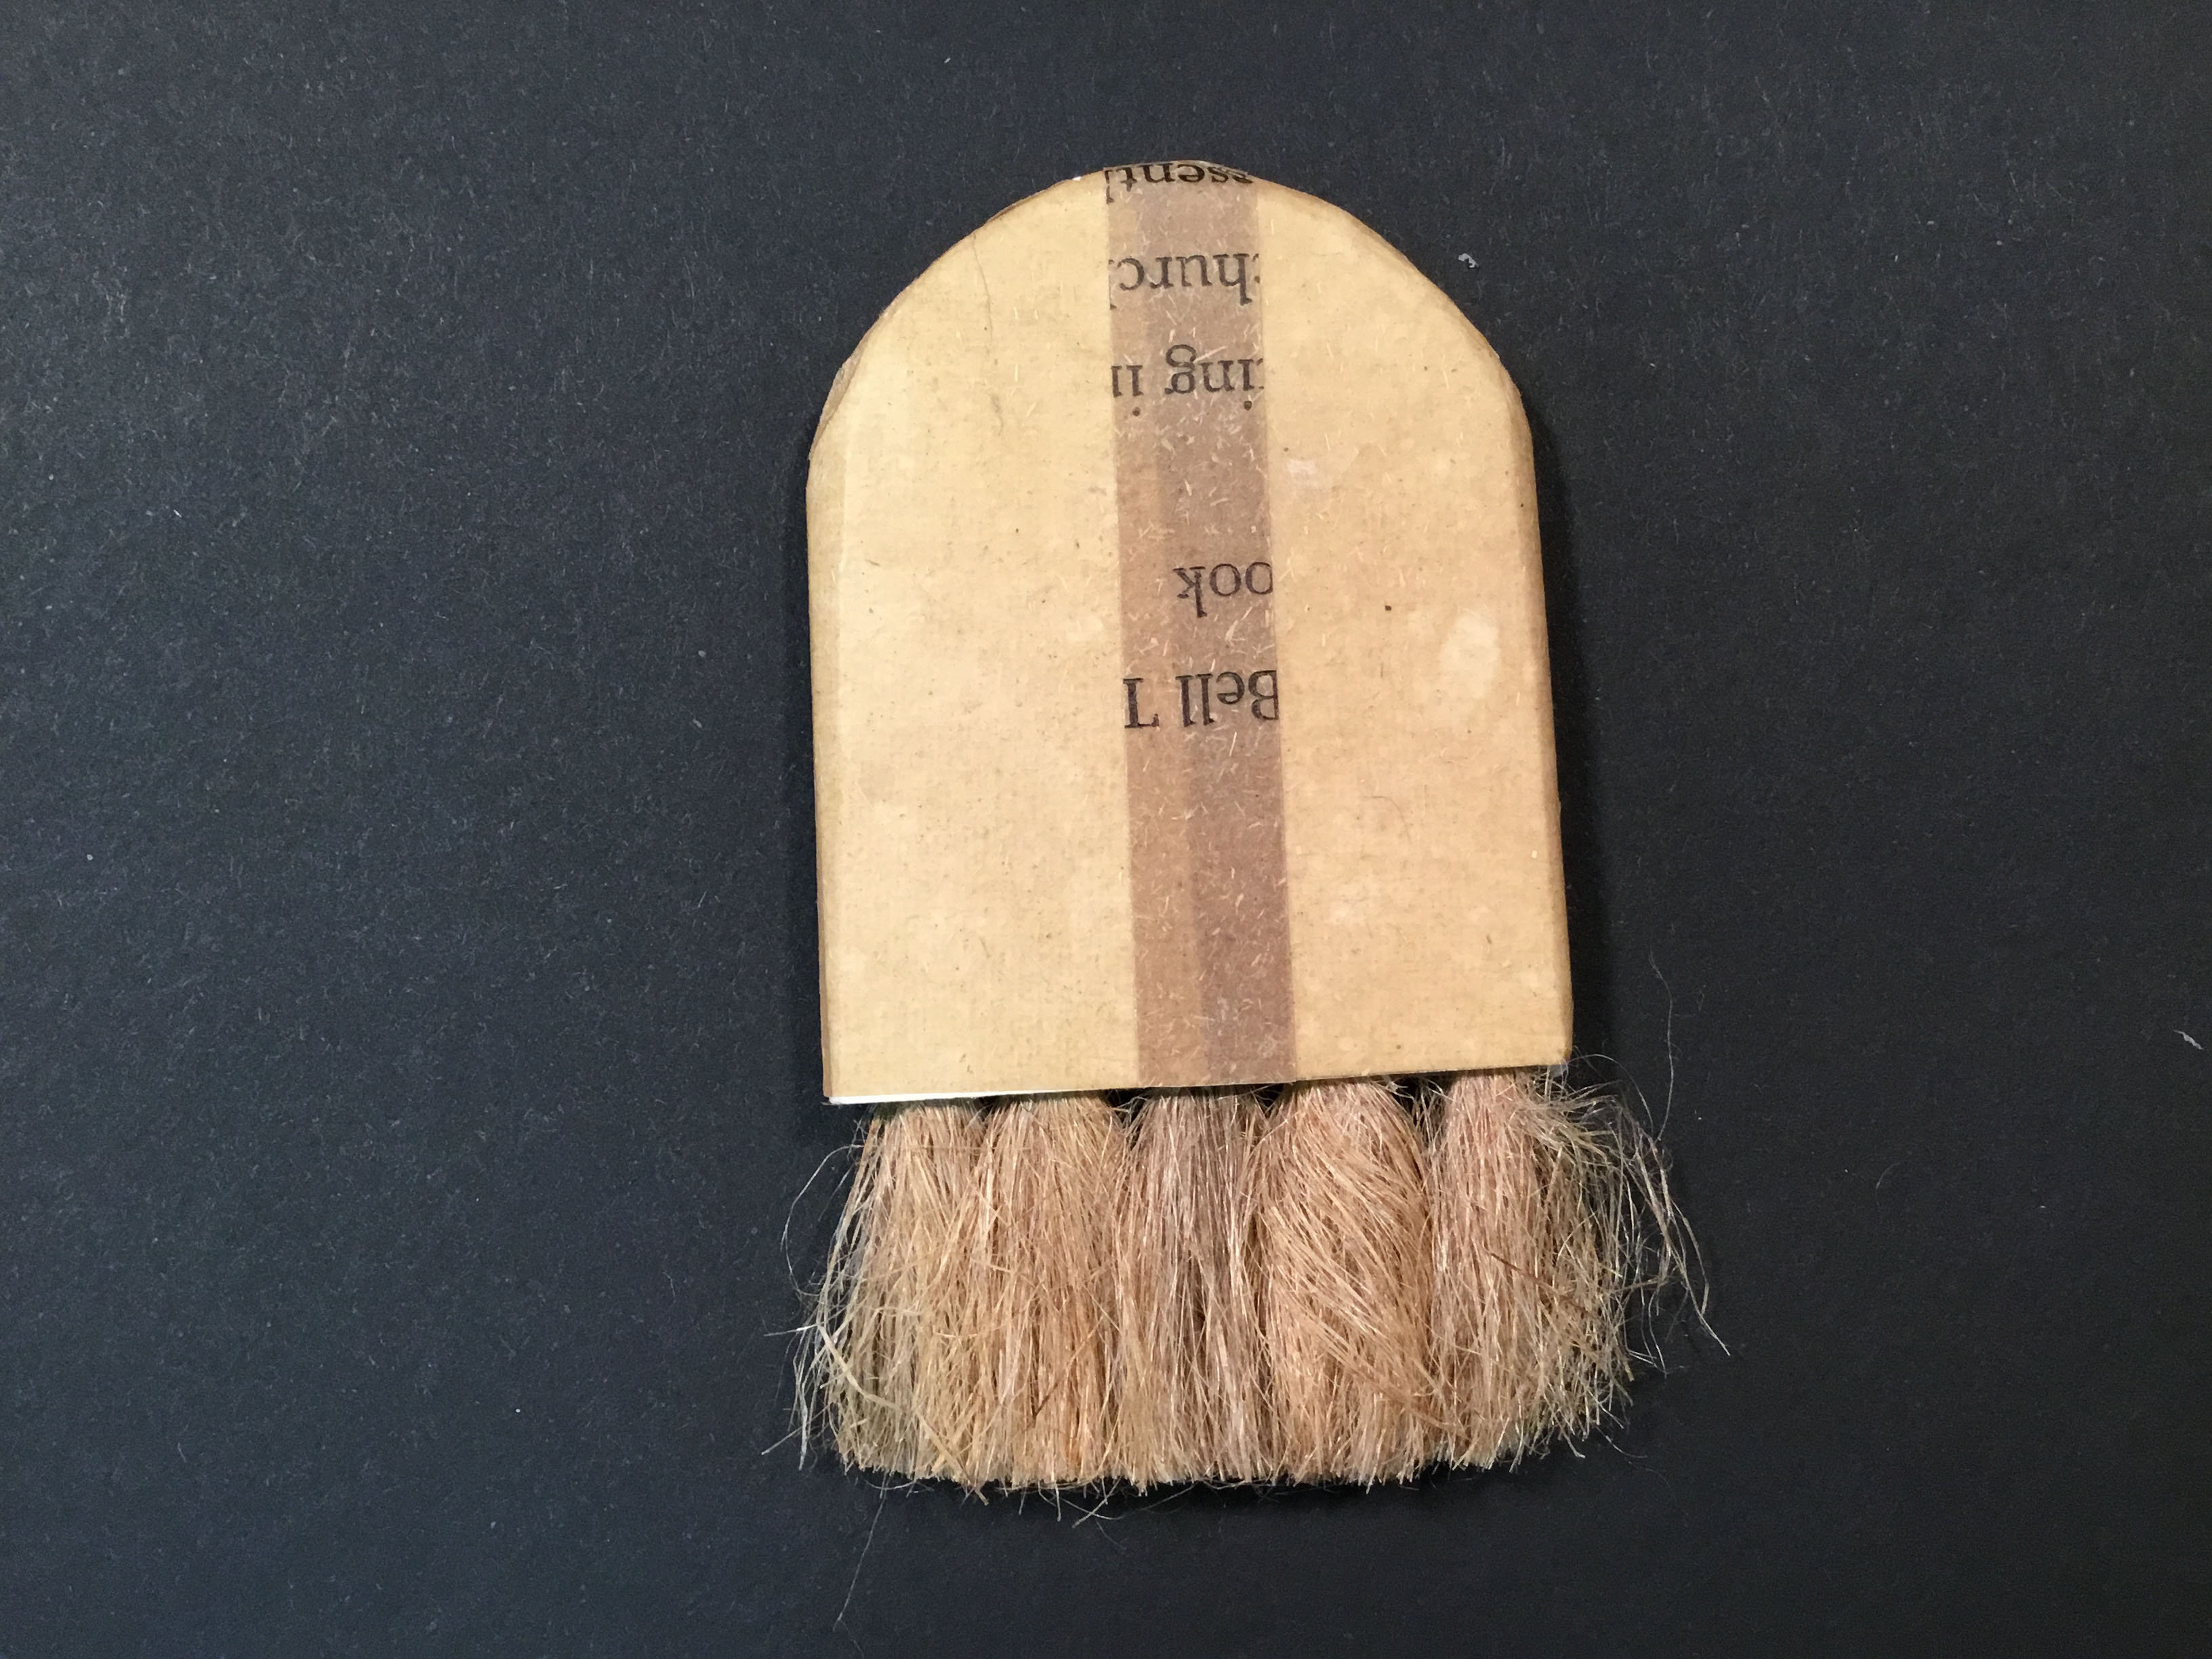 A small, flat, flaxfiber brush with a beige, arched handle and a strip of dark brown paper vertically layered in the center with illegible text printed on it.  